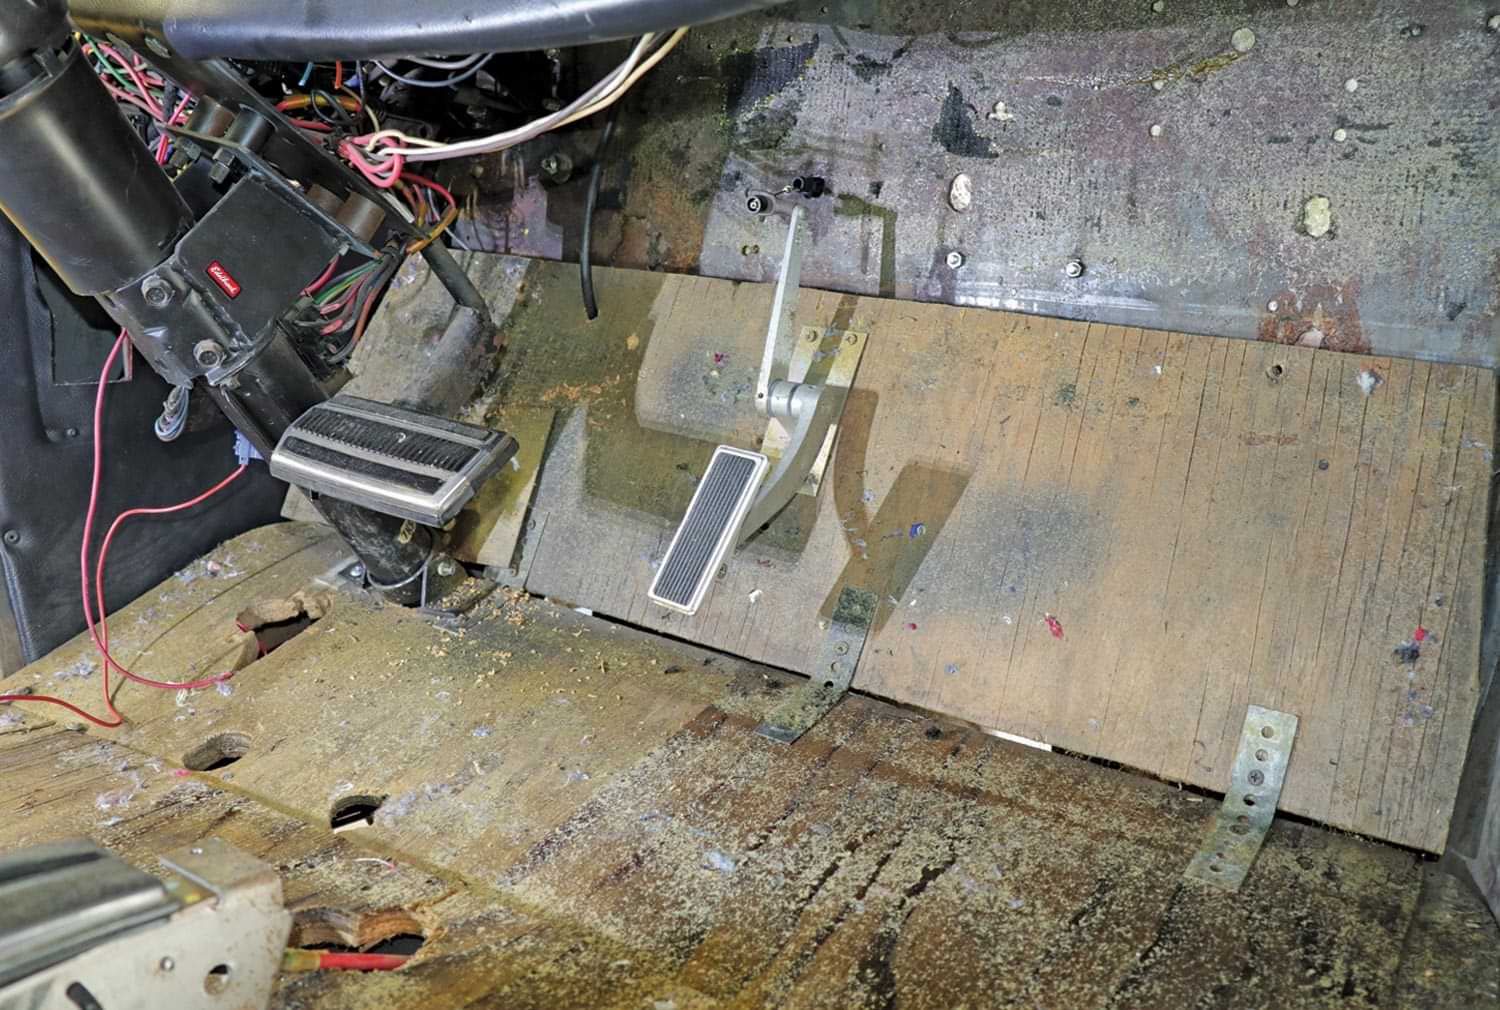 the removed carpeting reveals major problems in the floors, running from a hole-riddled plywood toeboard rearward to a water-damaged particle board trunk floor